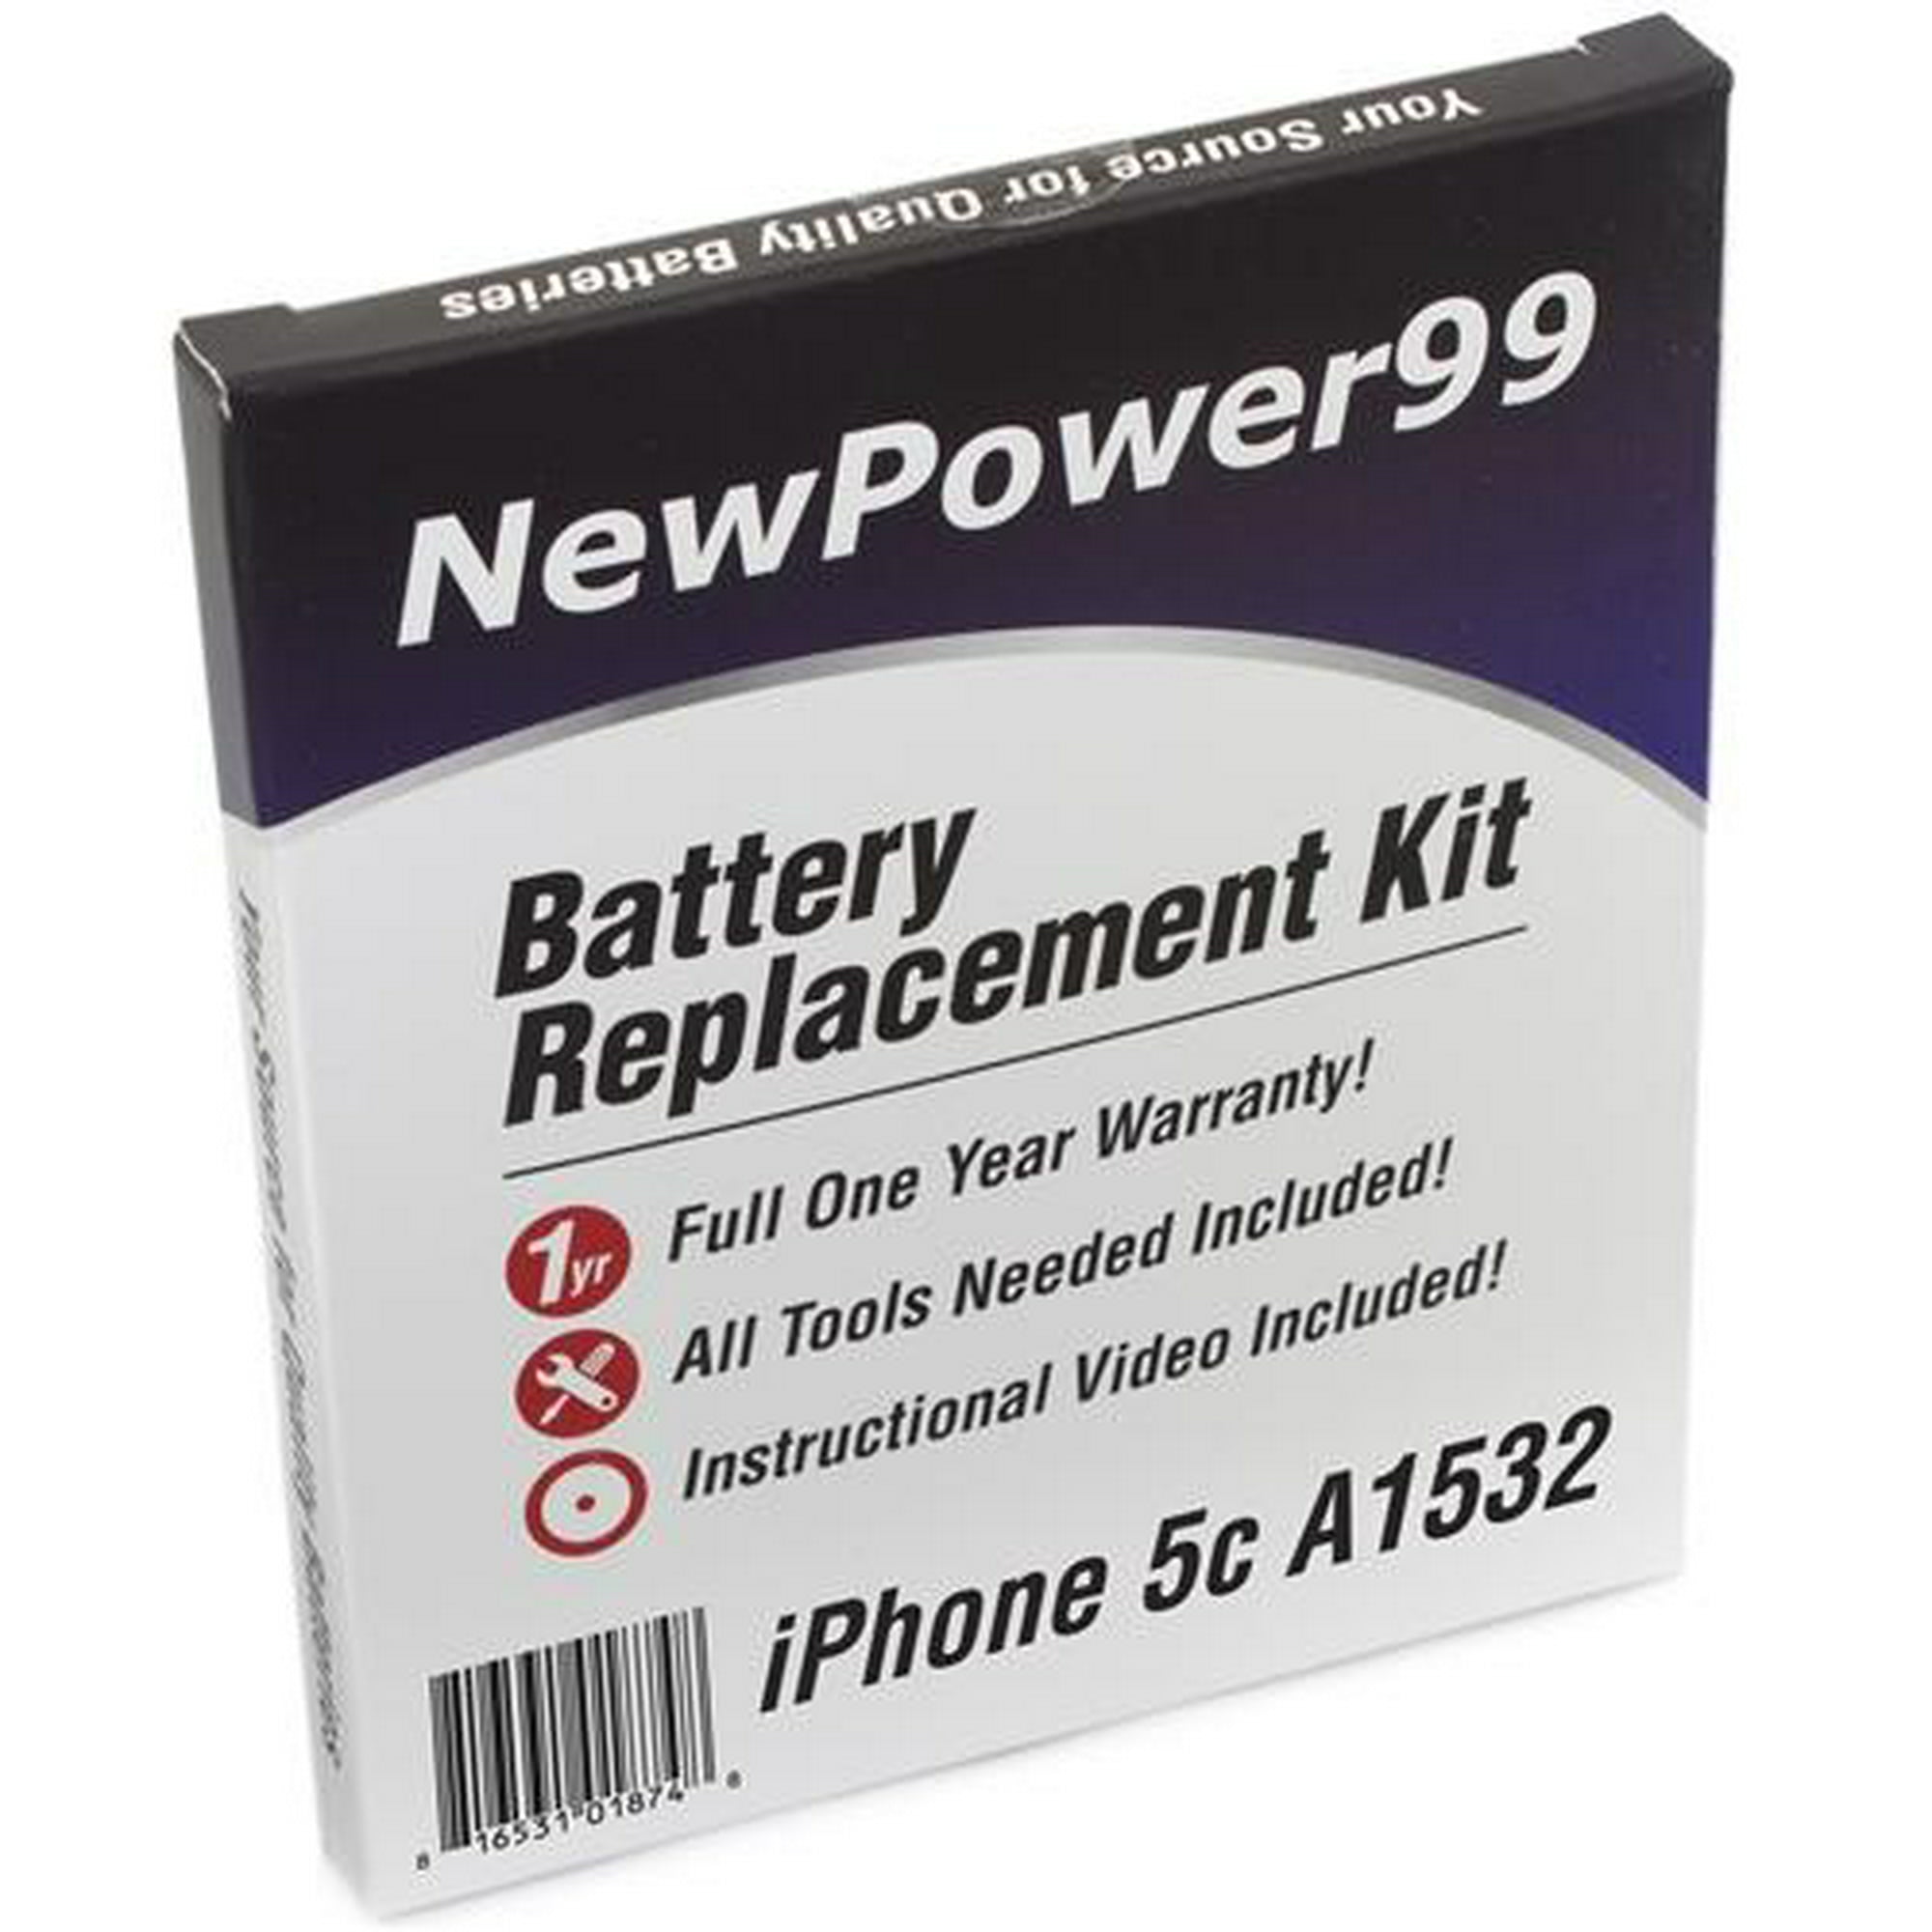 Apple iPhone 5C A1532 Battery Replacement Kit with Tools, Video Instructions, Extended Life Battery and Full One Year Warranty | Walmart